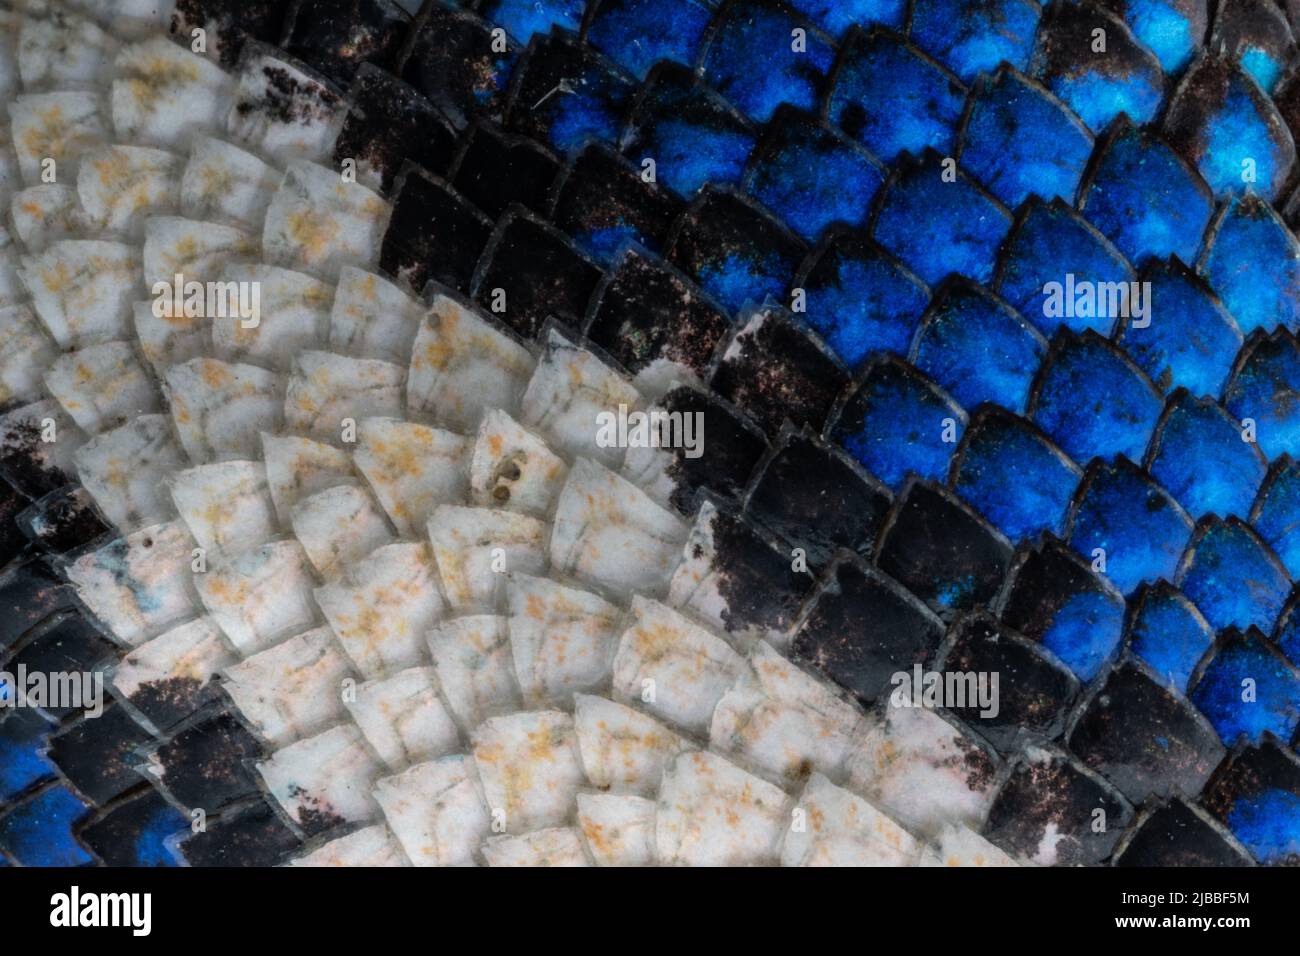 The colorful natural pattern of the belly scales of a western fence lizard (Sceloporus occidentalis) from the Central valley of California. Stock Photo